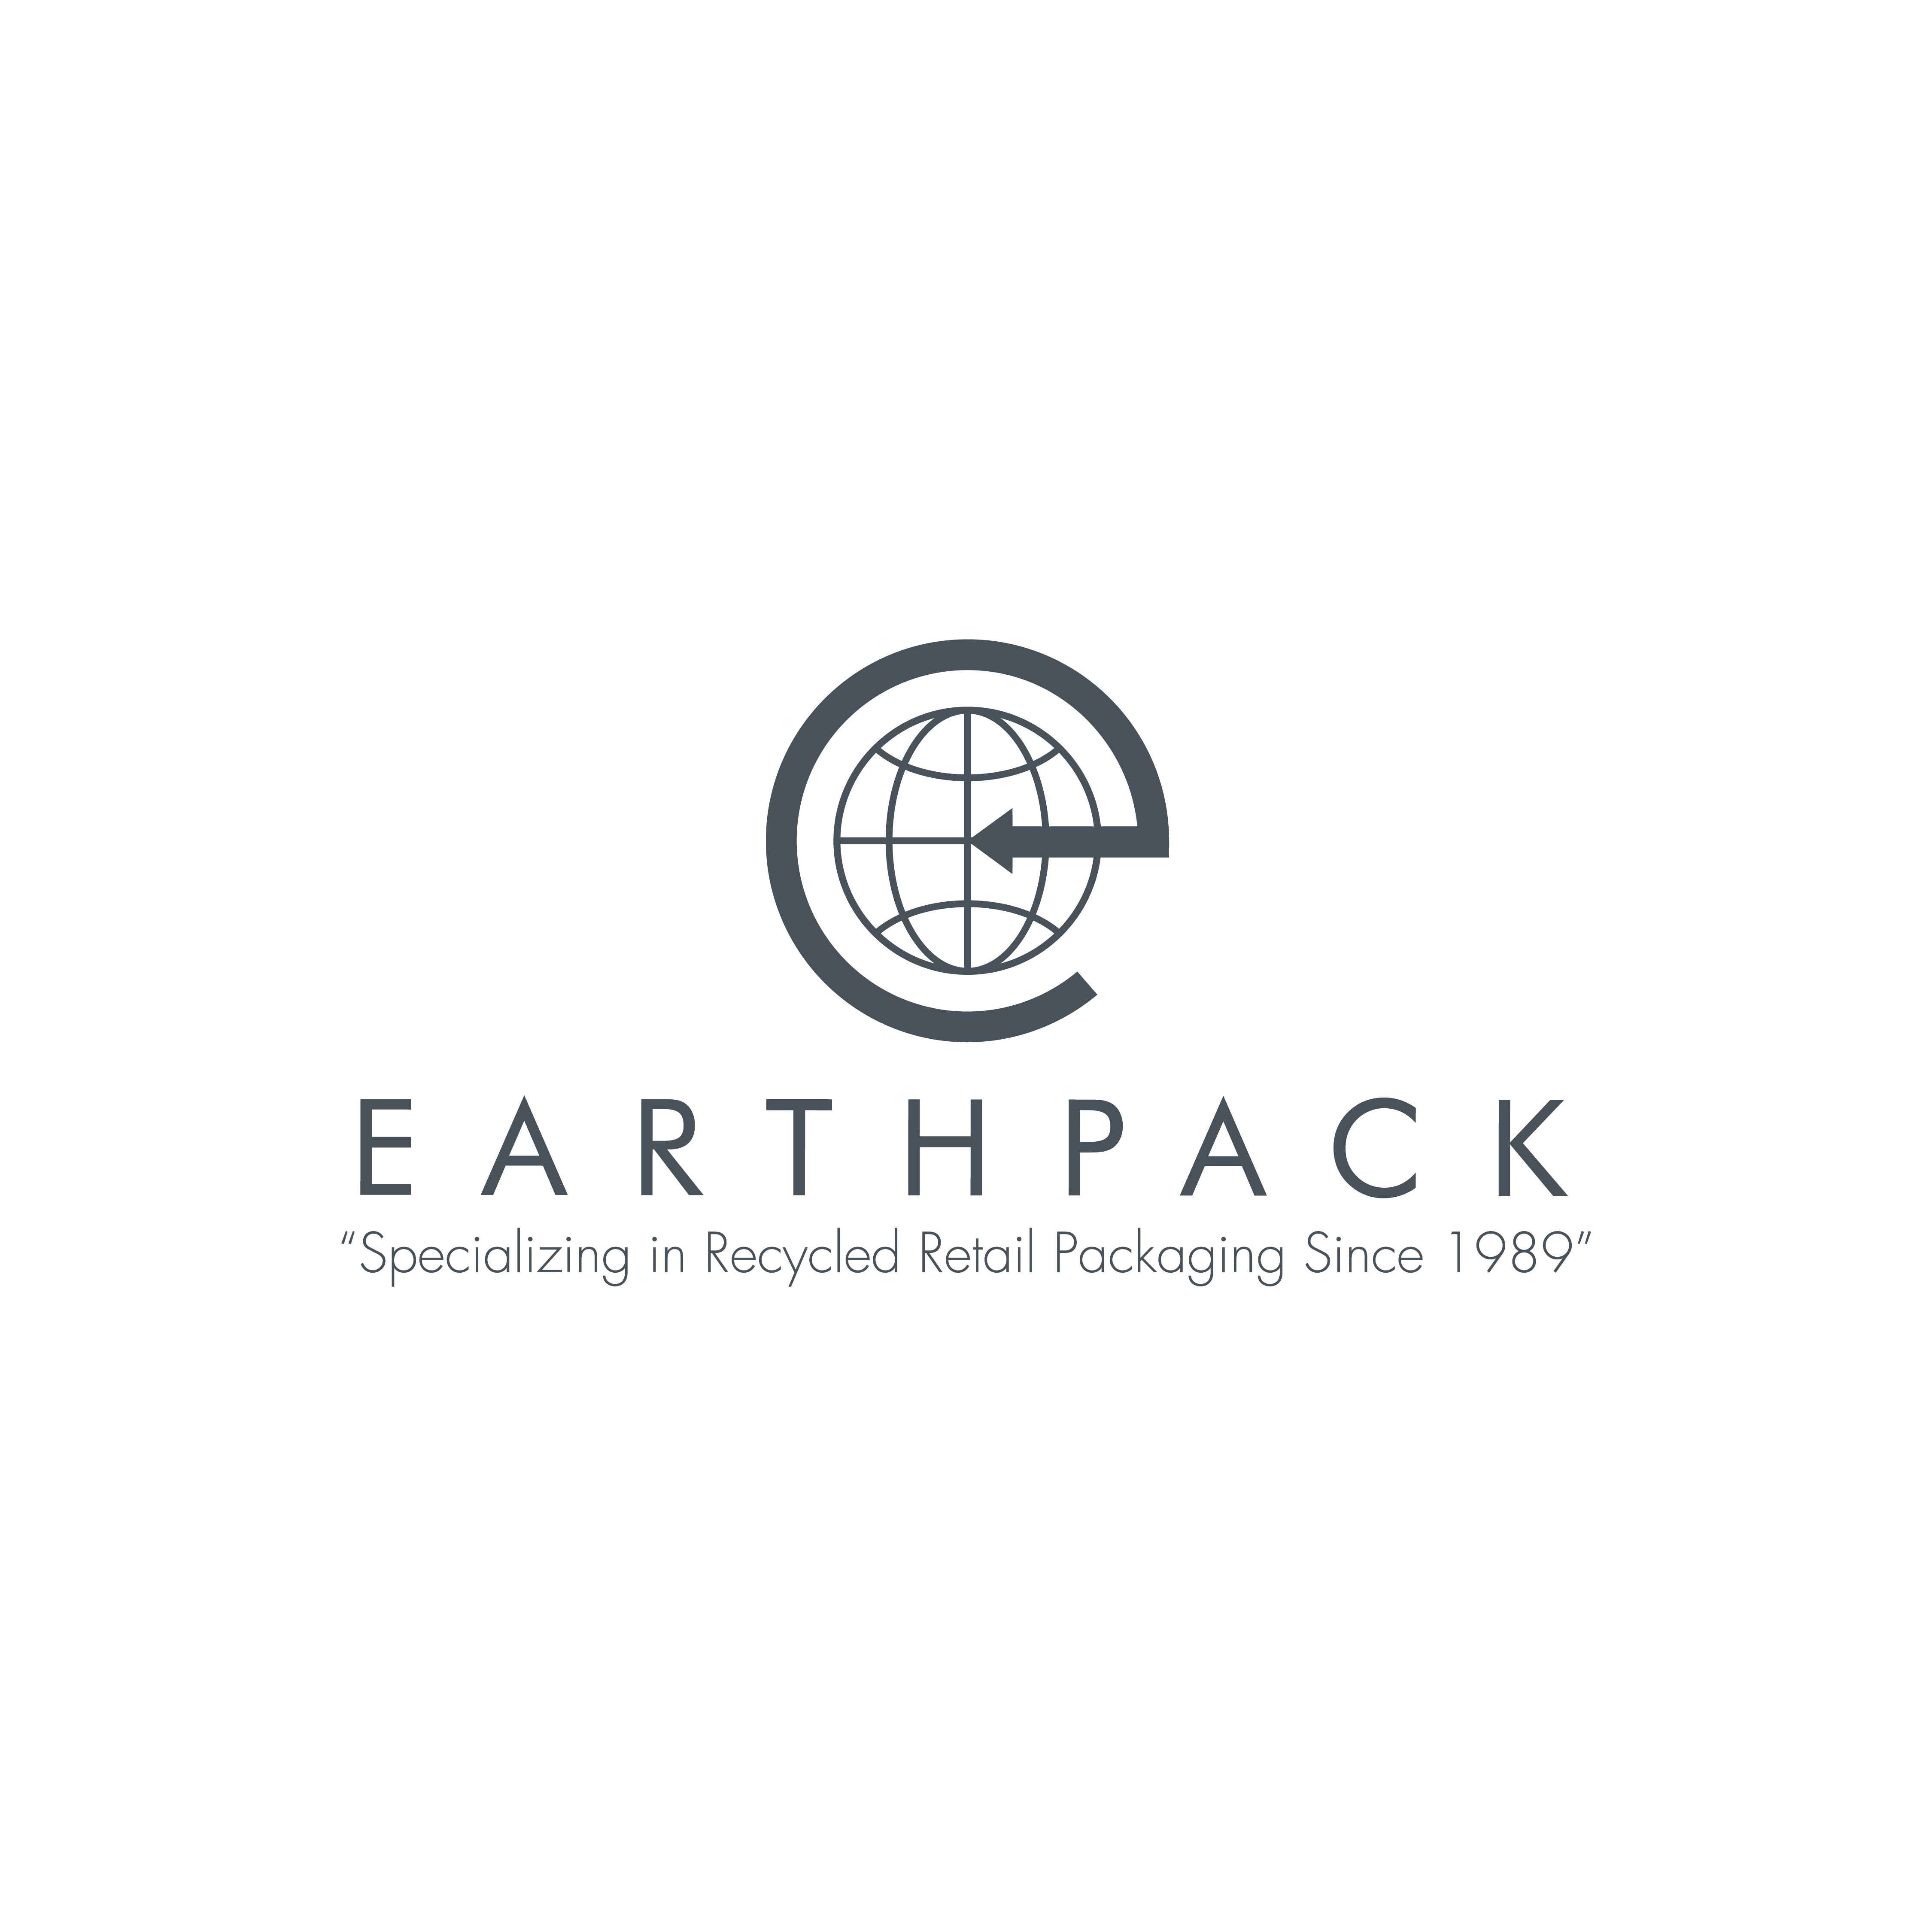 Customized Eco-Friendly Retail Packaging, Earthpack